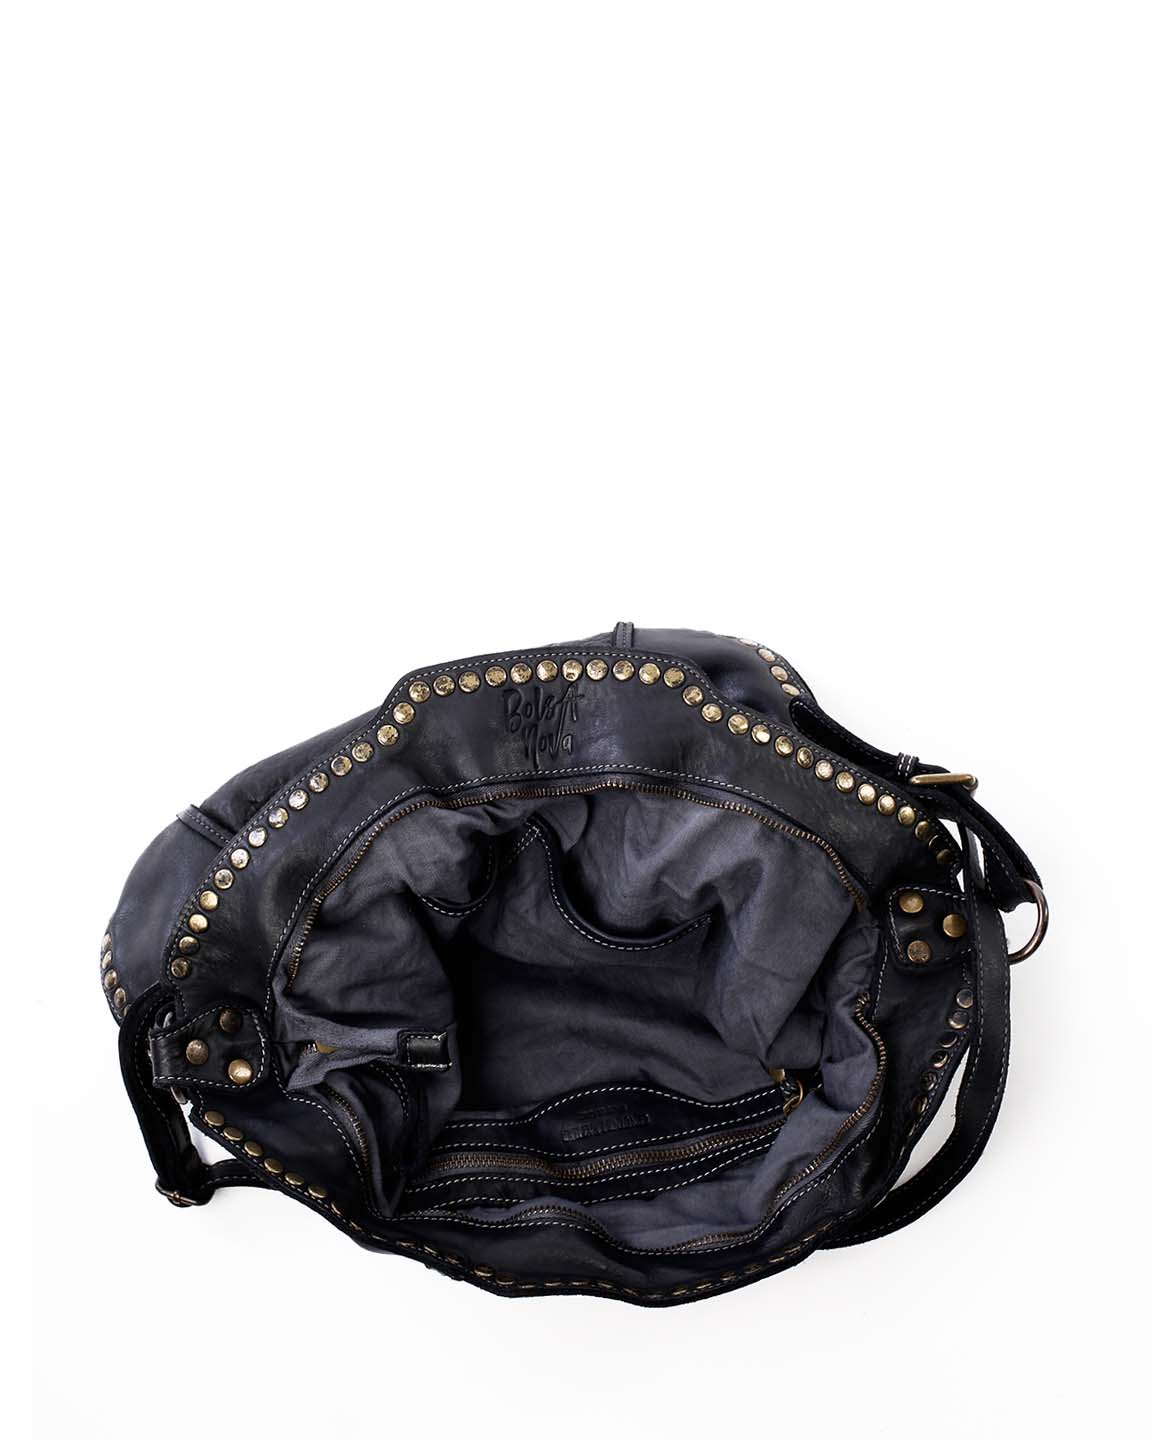 Inside View of Anna Leather Hobo with Studs in Black